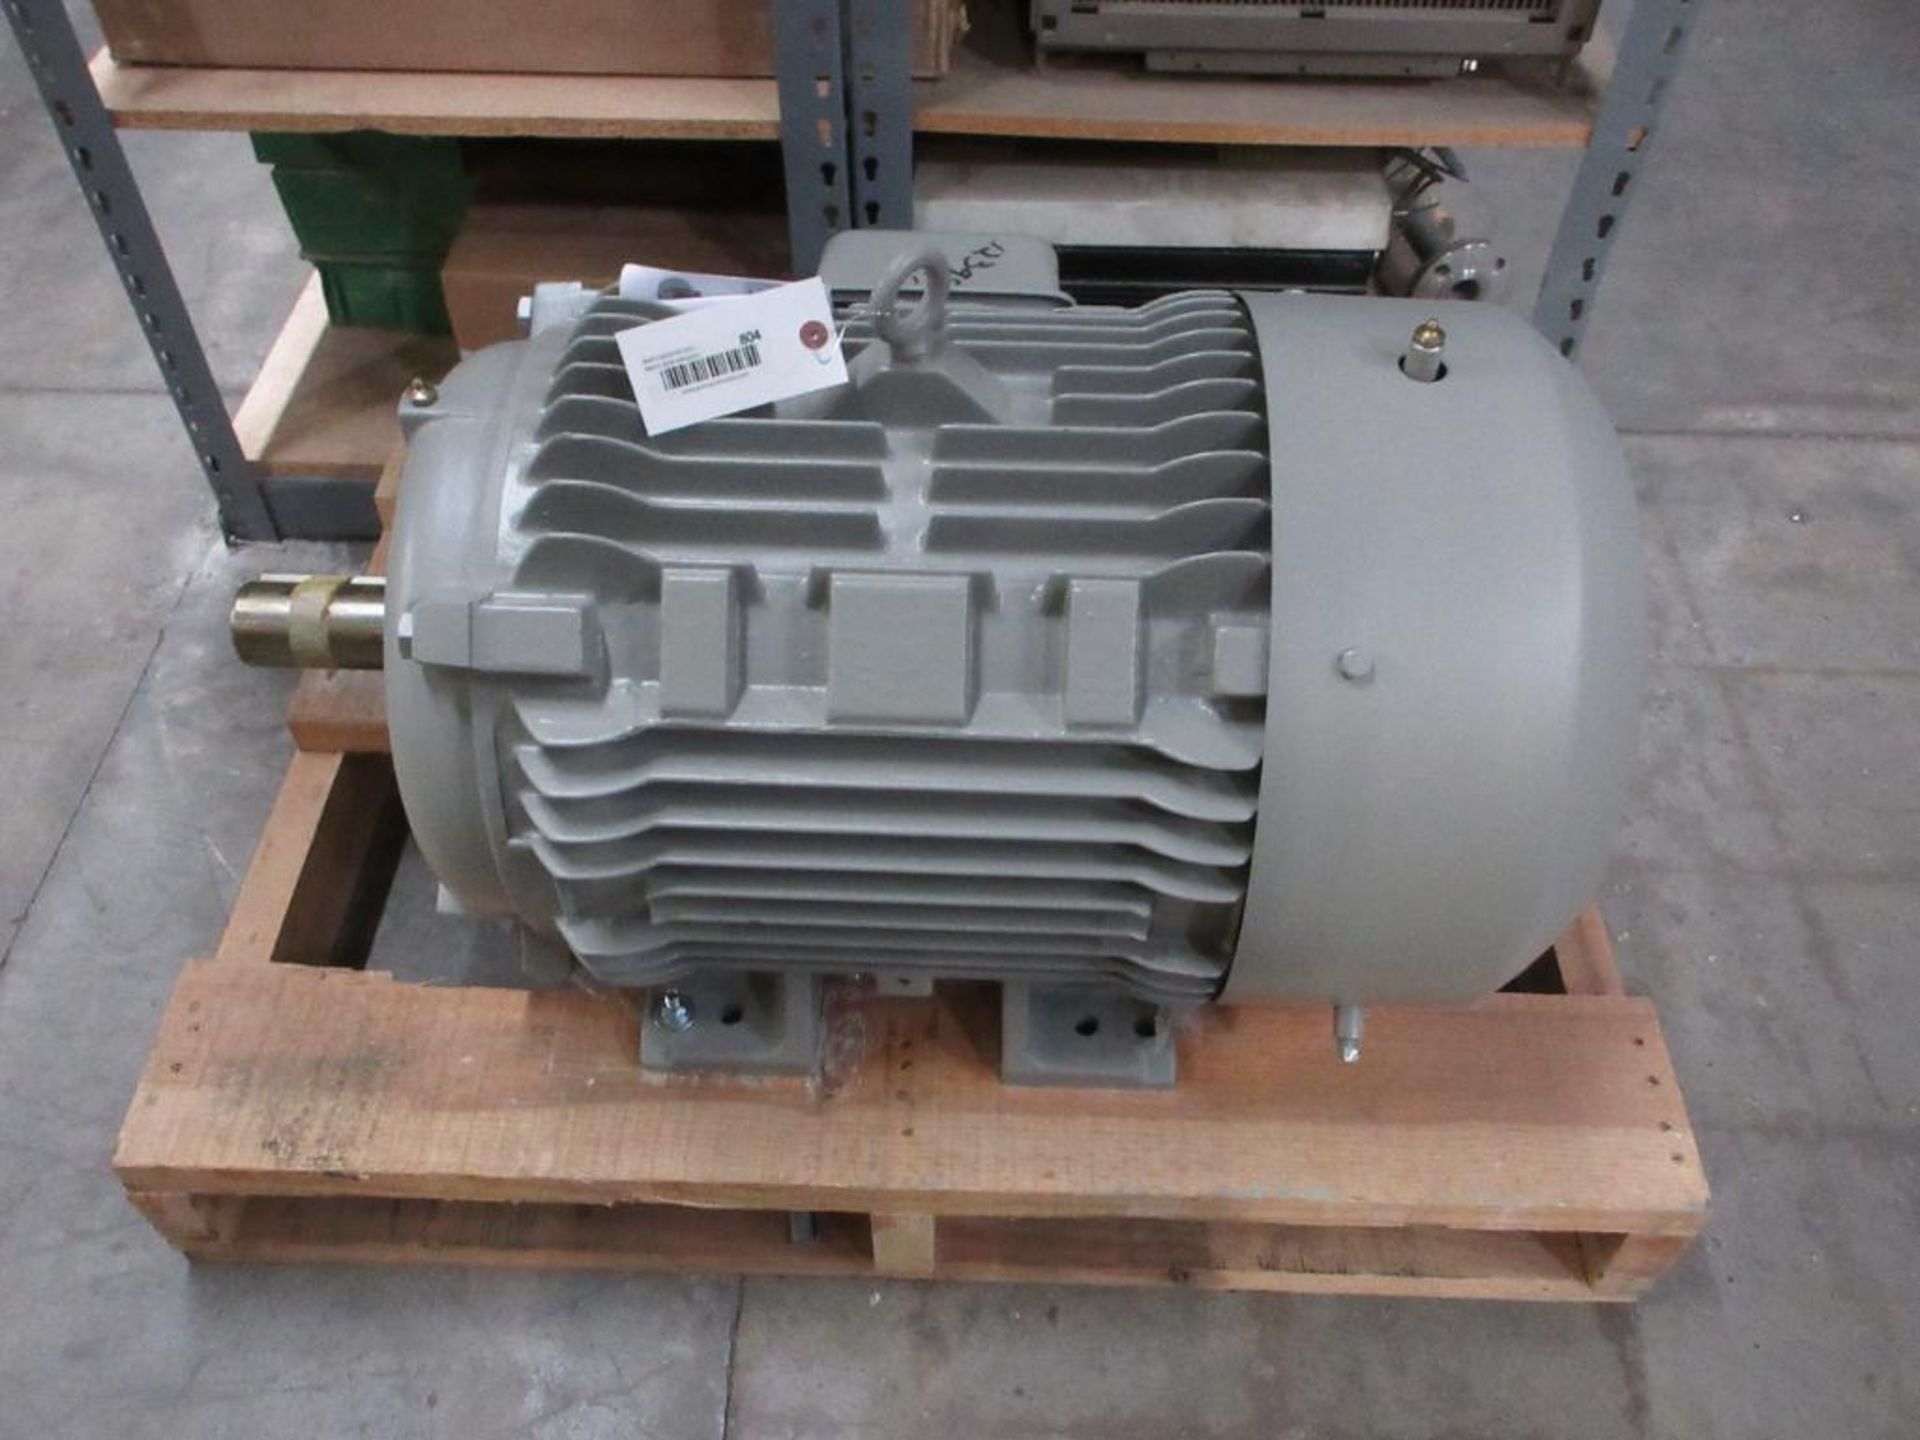 SIEMENS MOTOR 40HP 3 PHASE 1800RPM FRAME 324T P/N 1LE22213AB116AA3 TYPE GP100 (THIS LOT IS FOB CAMAR - Image 4 of 9